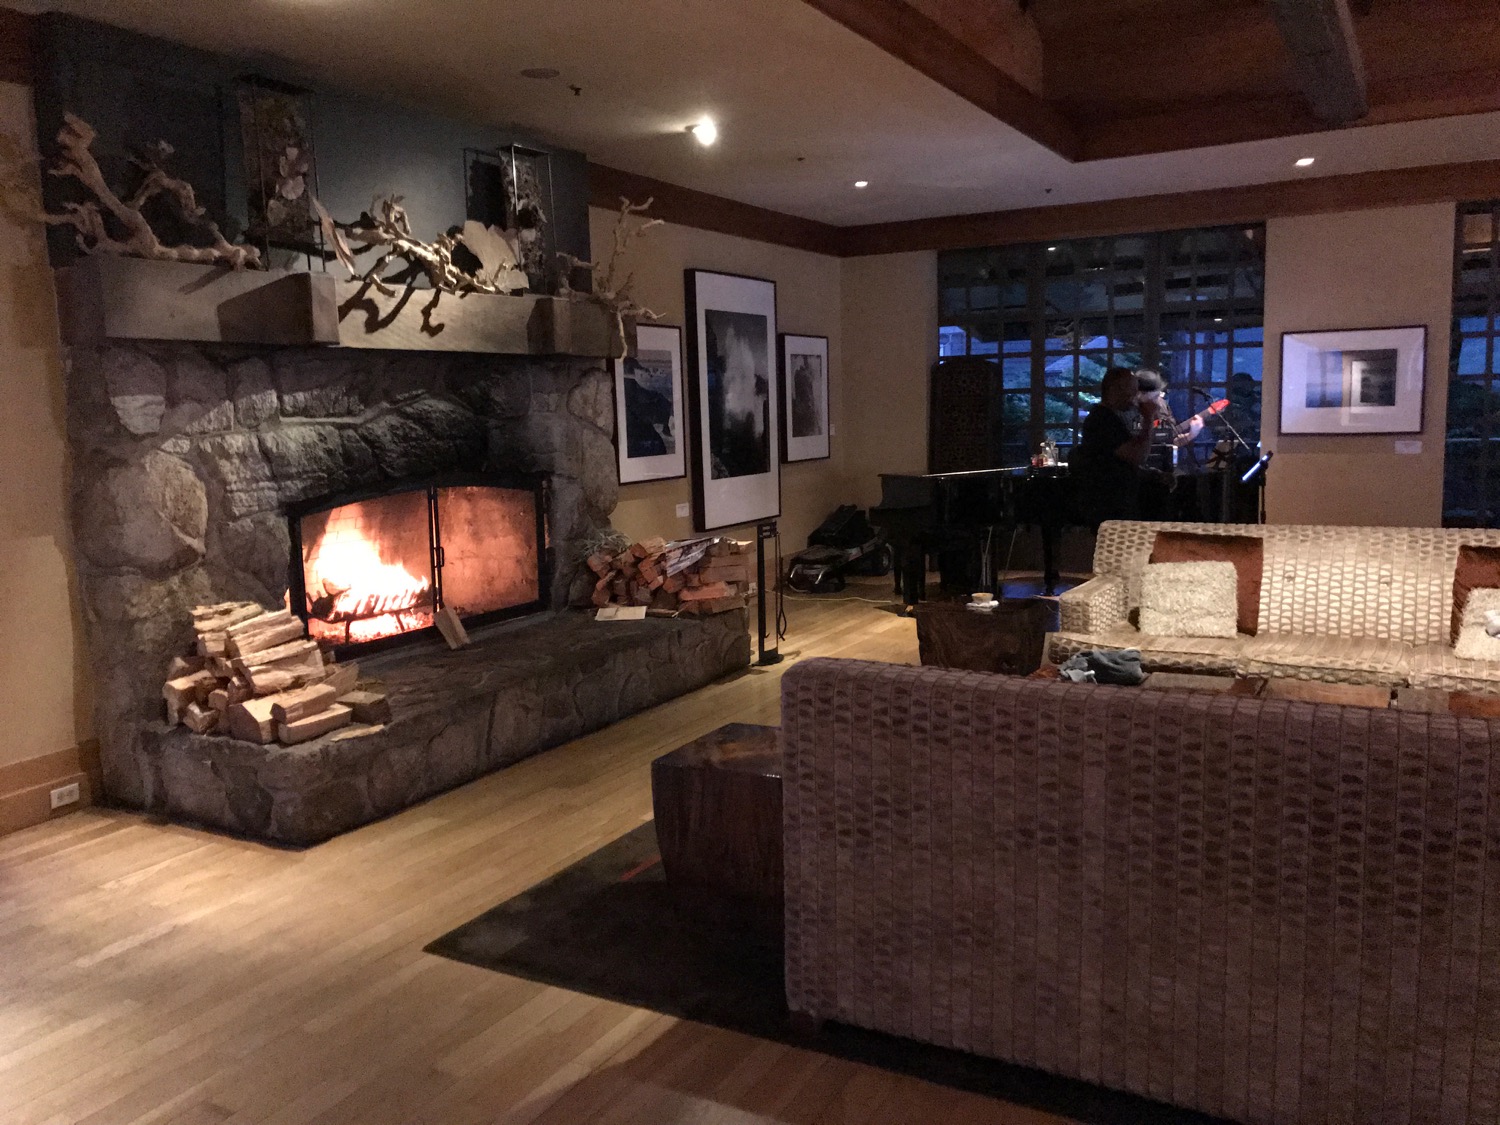 a room with a fireplace and a man playing a guitar